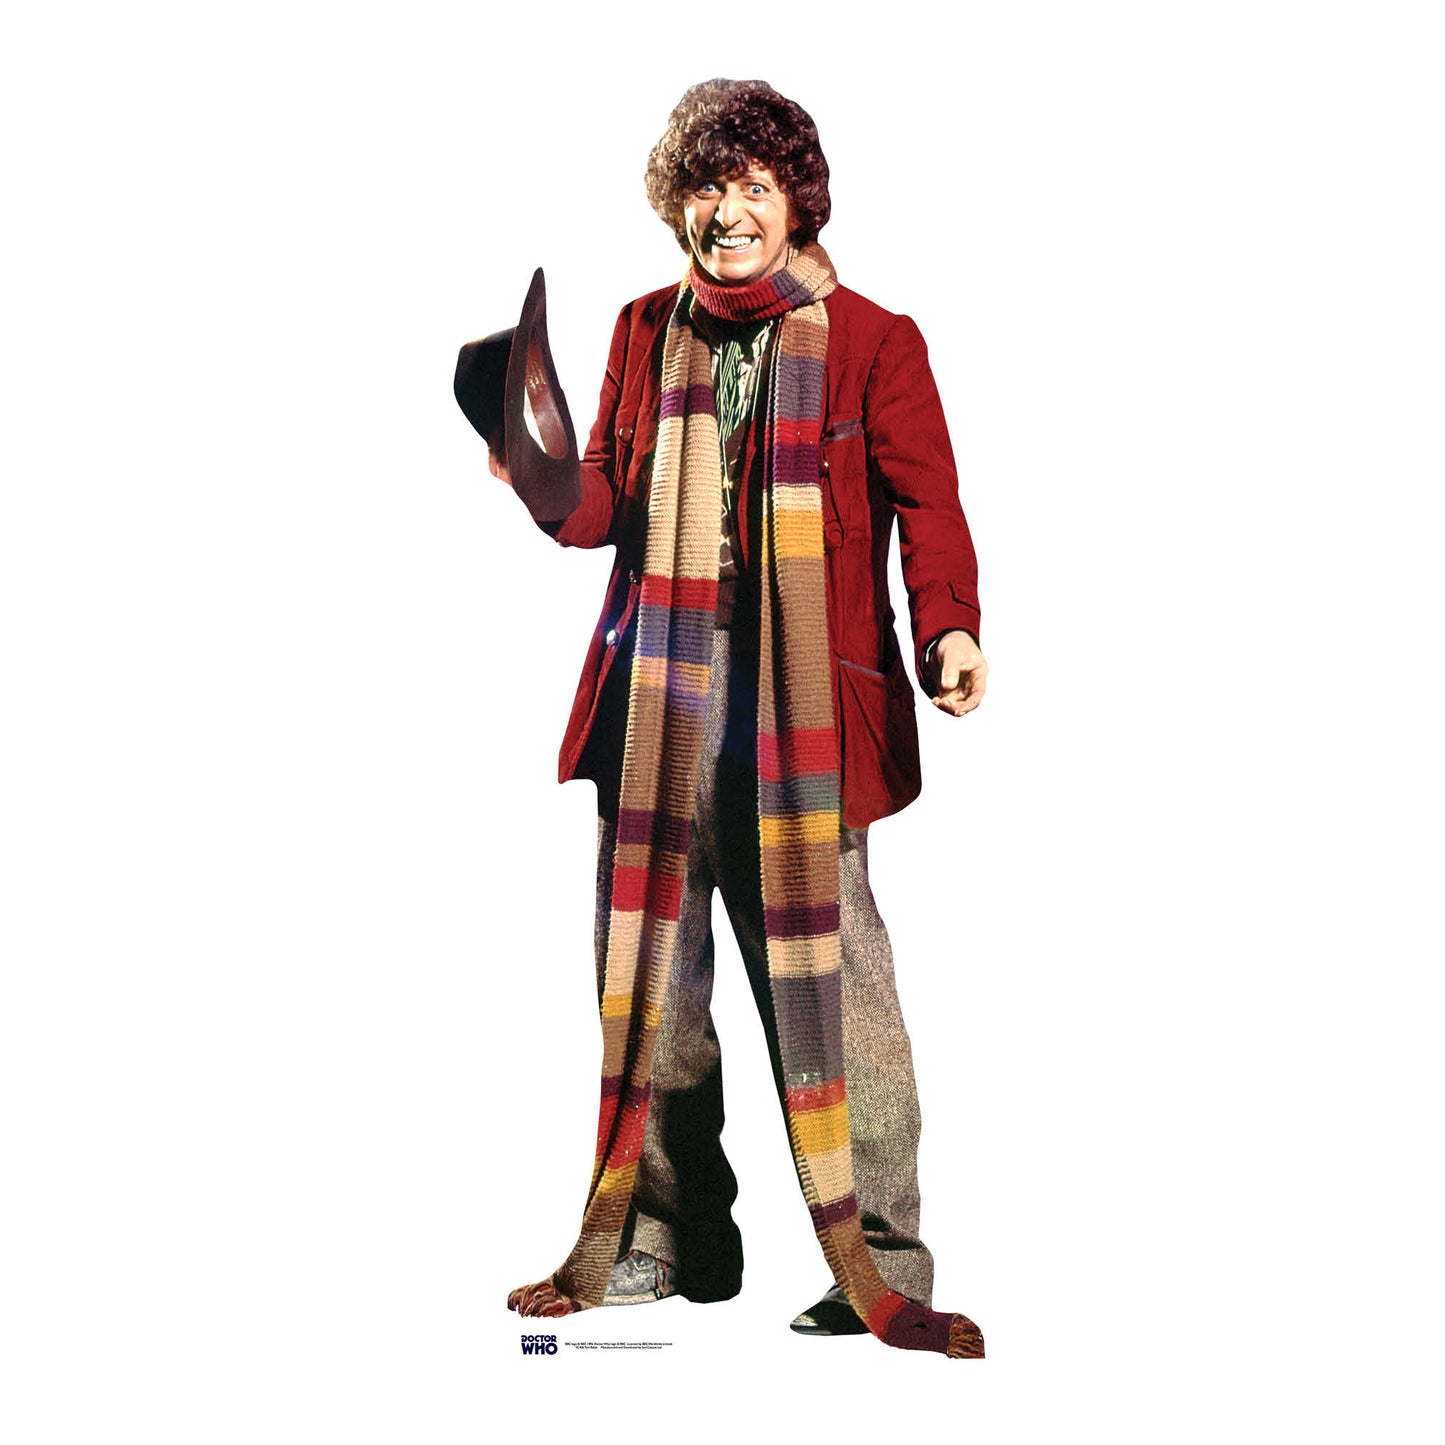 Tom Baker - Fourth Doctor Cardboard Cut Out Height 181cm - Star Cutouts